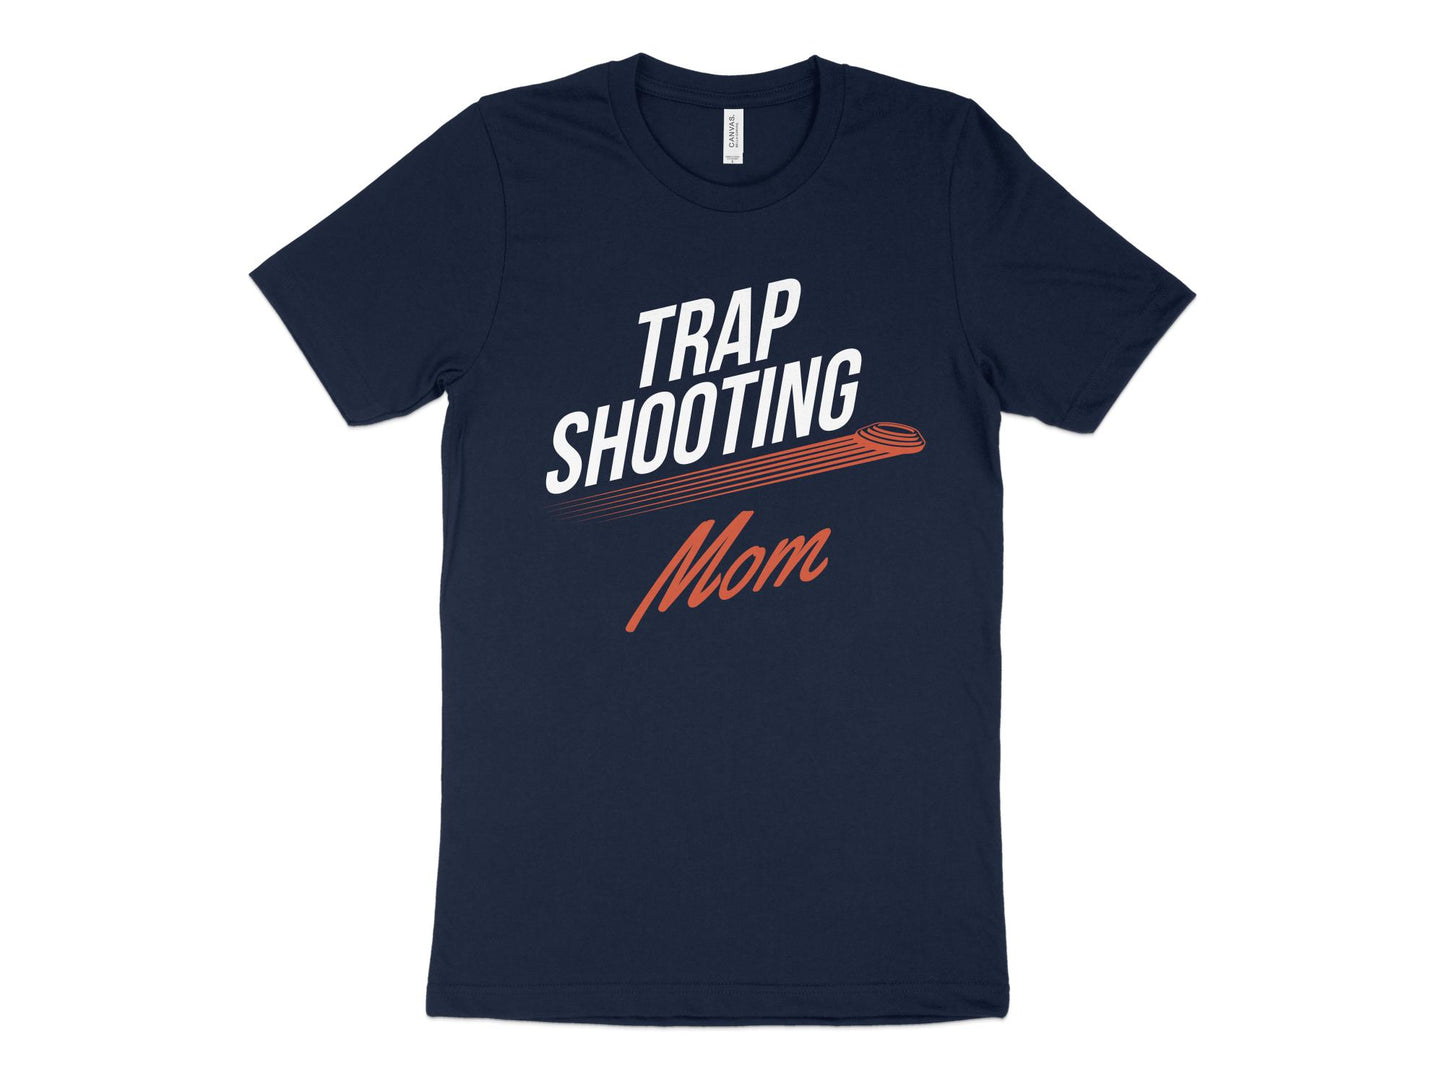 Trap Shooting Shirt for Moms, navy blue